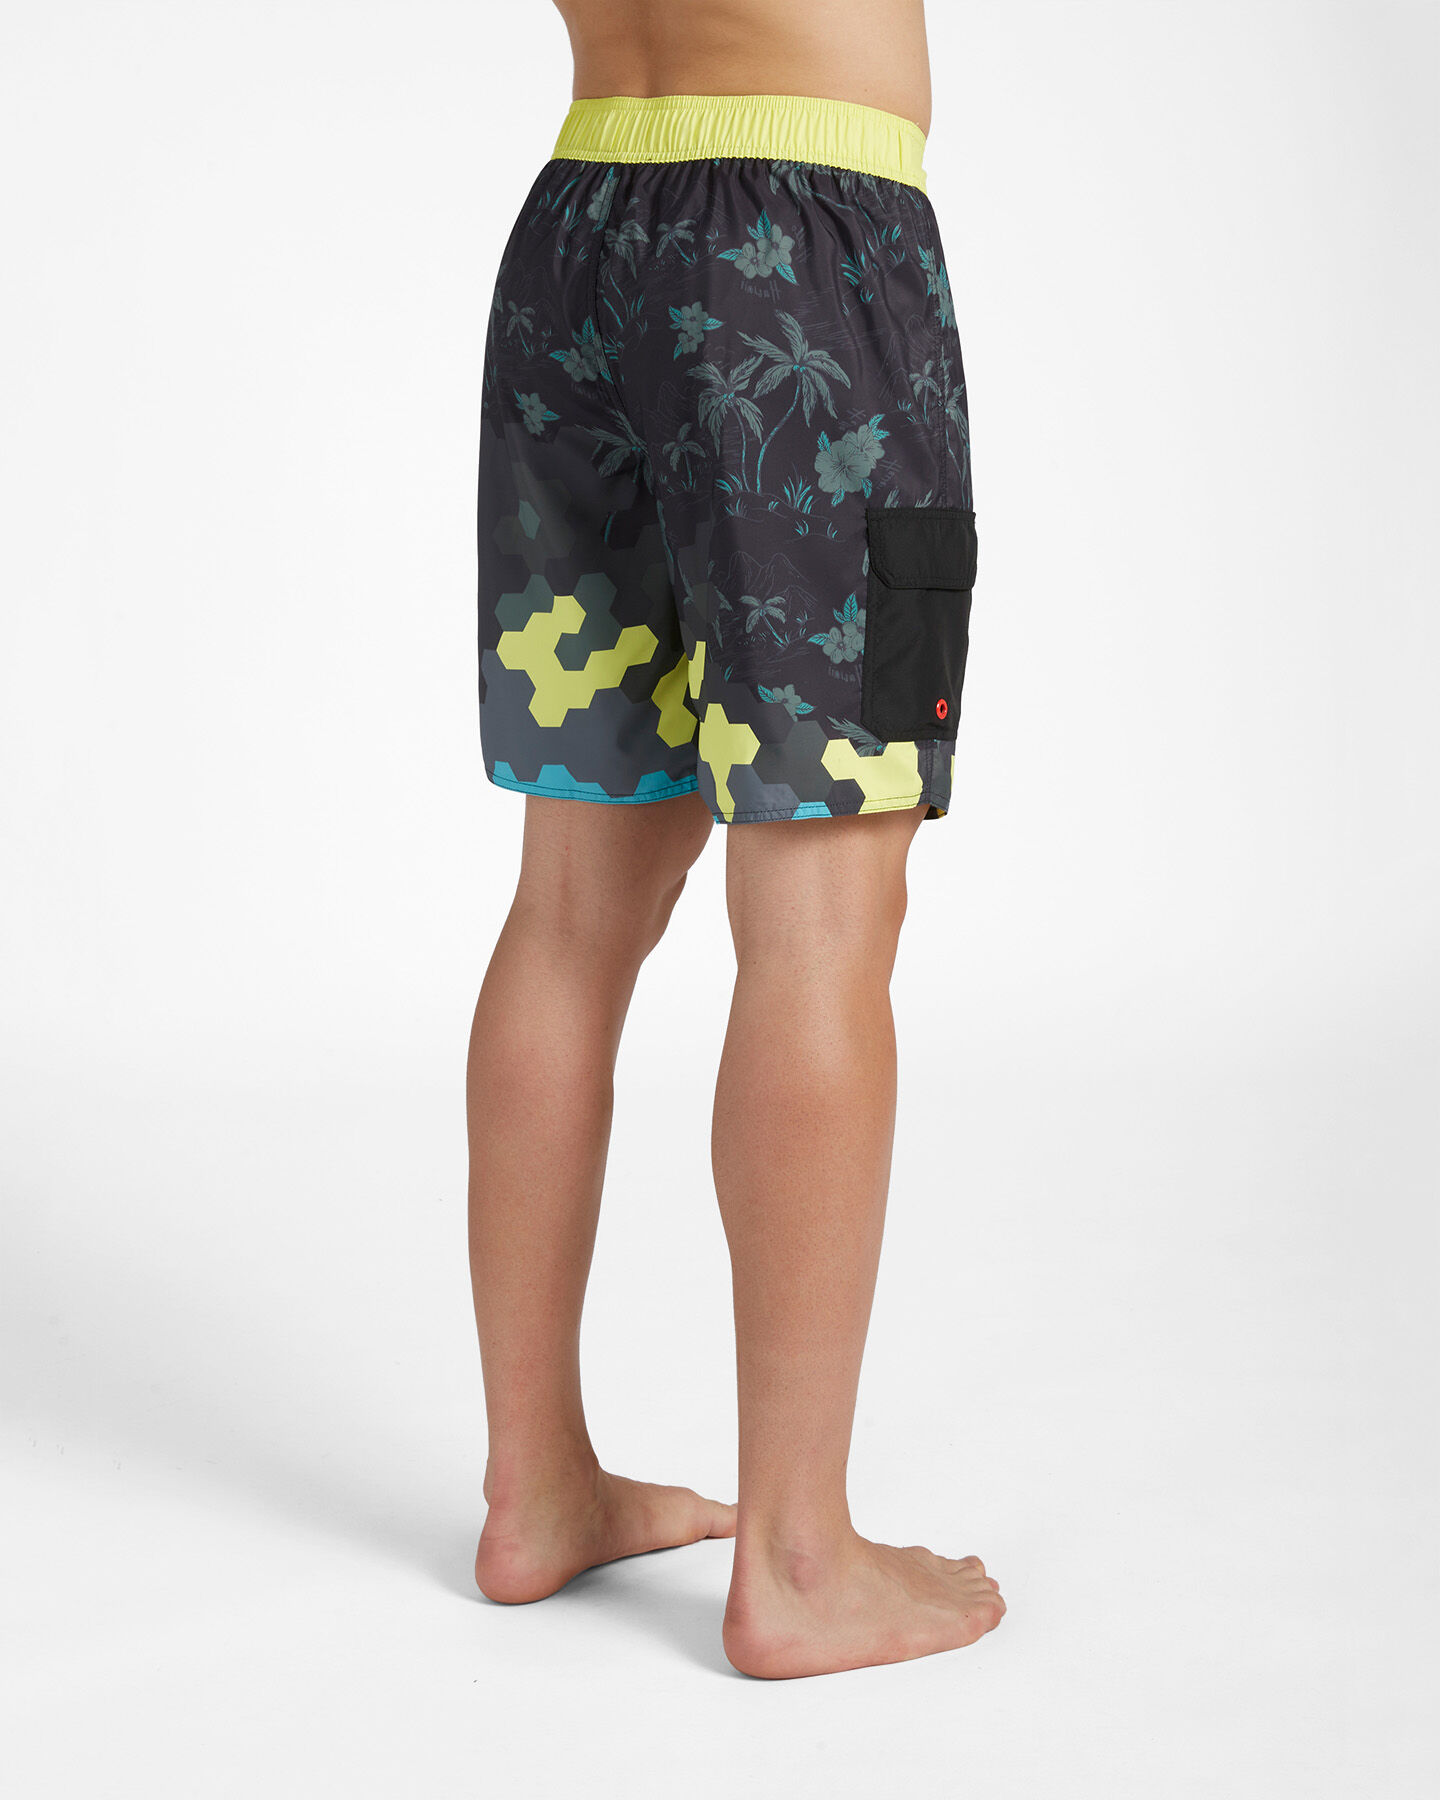  Boardshort mare MISTRAL PALMS M S4102885|AOP|S scatto 1